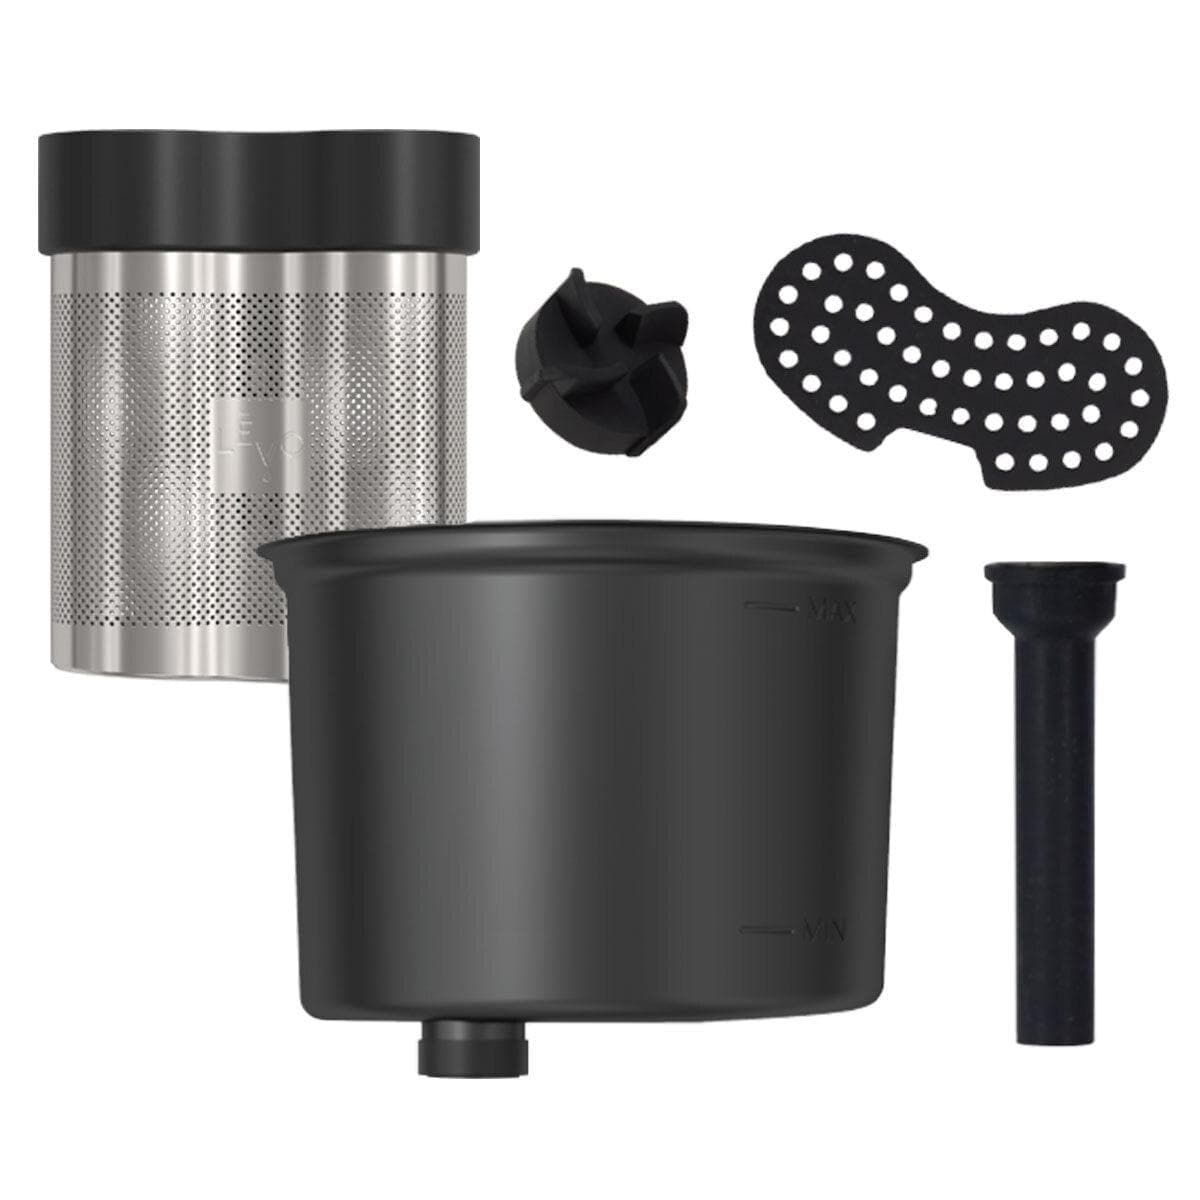 LEVO Lux Spare Parts Kit. Removable parts for the LEVO Lux infuser machine.